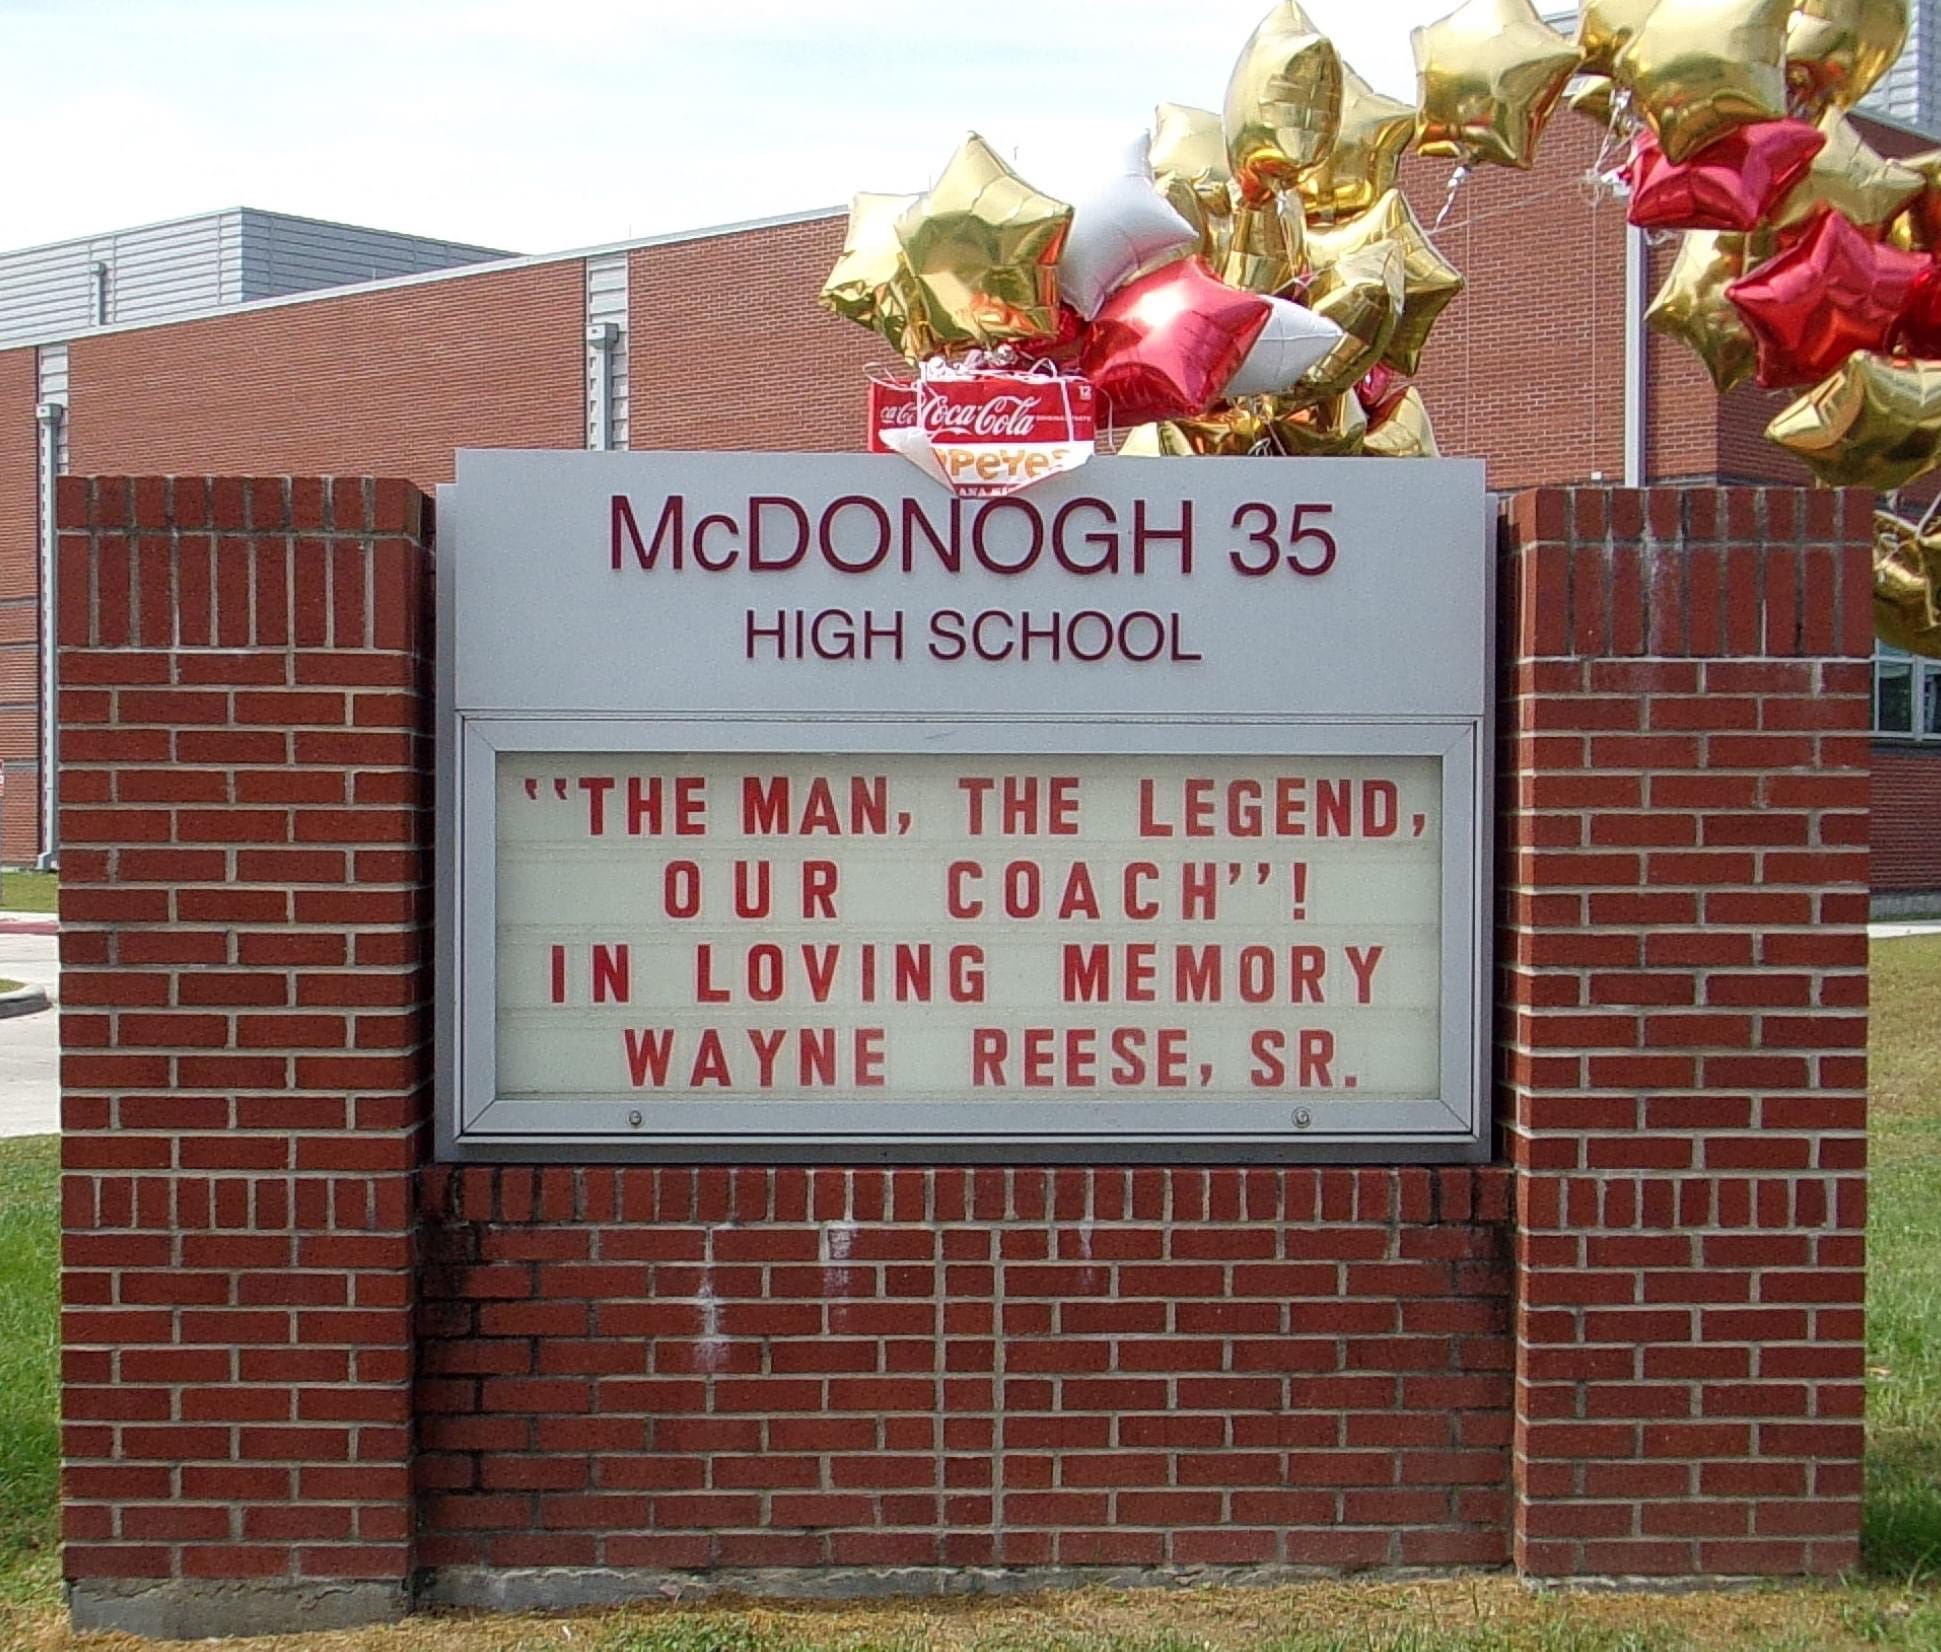 After the April 2 death of longtime coach Wayne Reese Sr., the marquee at McDonogh 35 High School paid tribute to the man who was a father figure to generations of players.